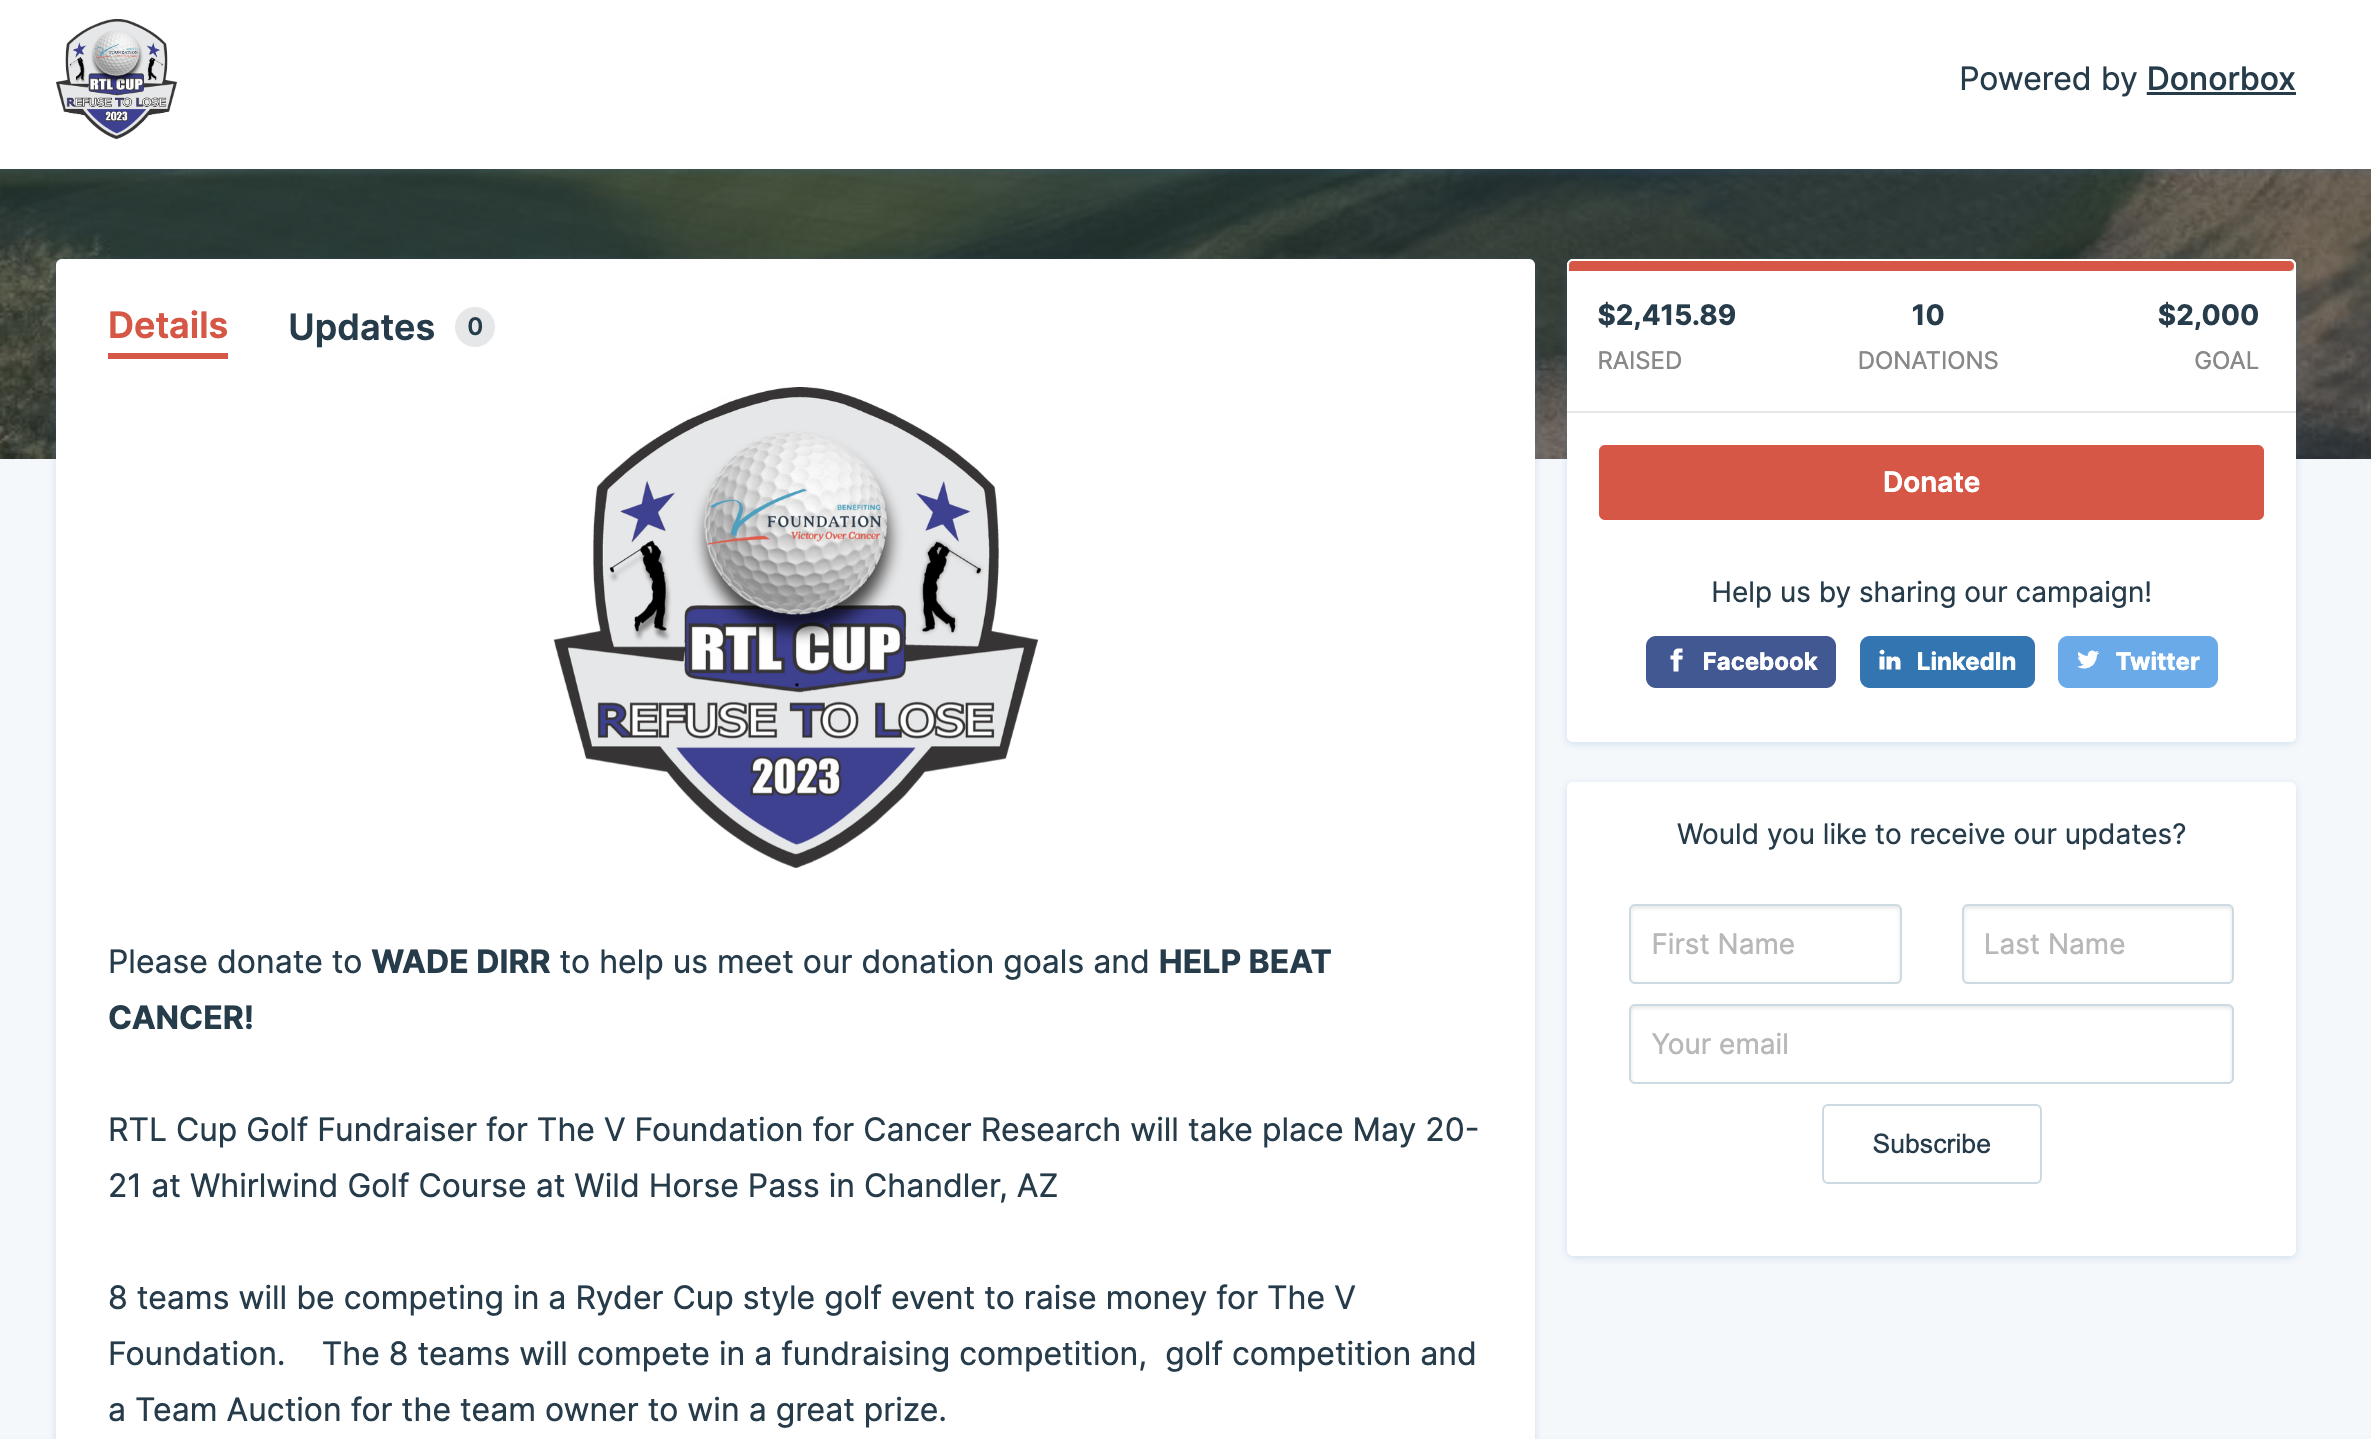 Example of an organization using Donorbox to raise funds for a golf tournament fundraiser. 